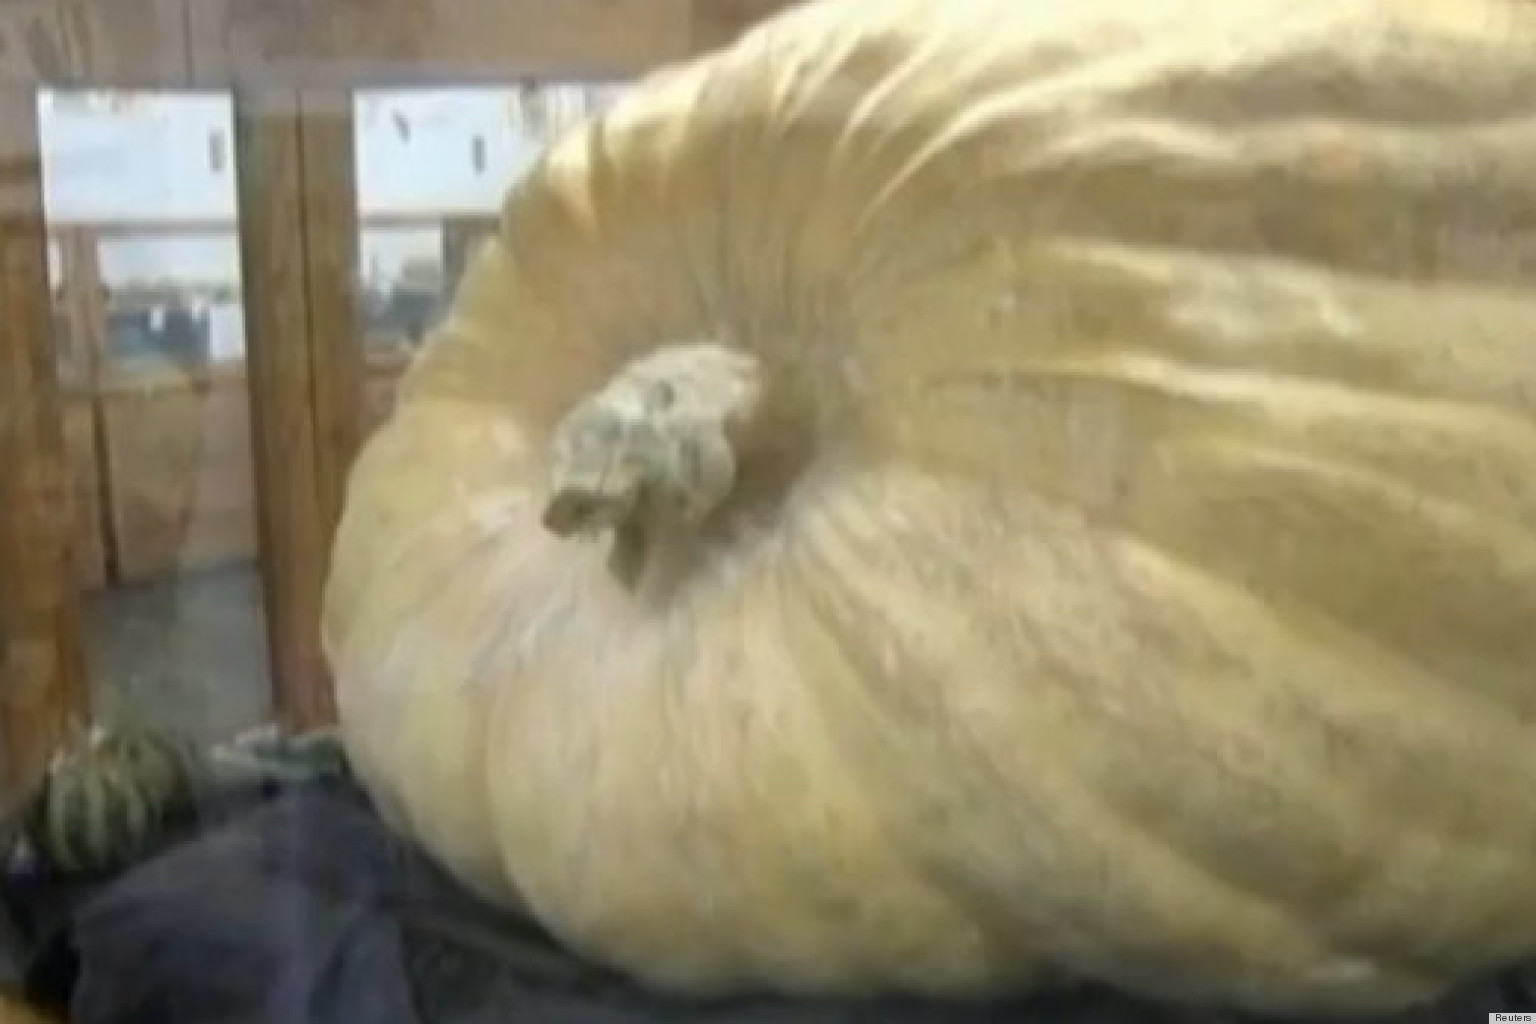 ron-wallace-grows-the-largest-pumpkin-breaking-world-record-video